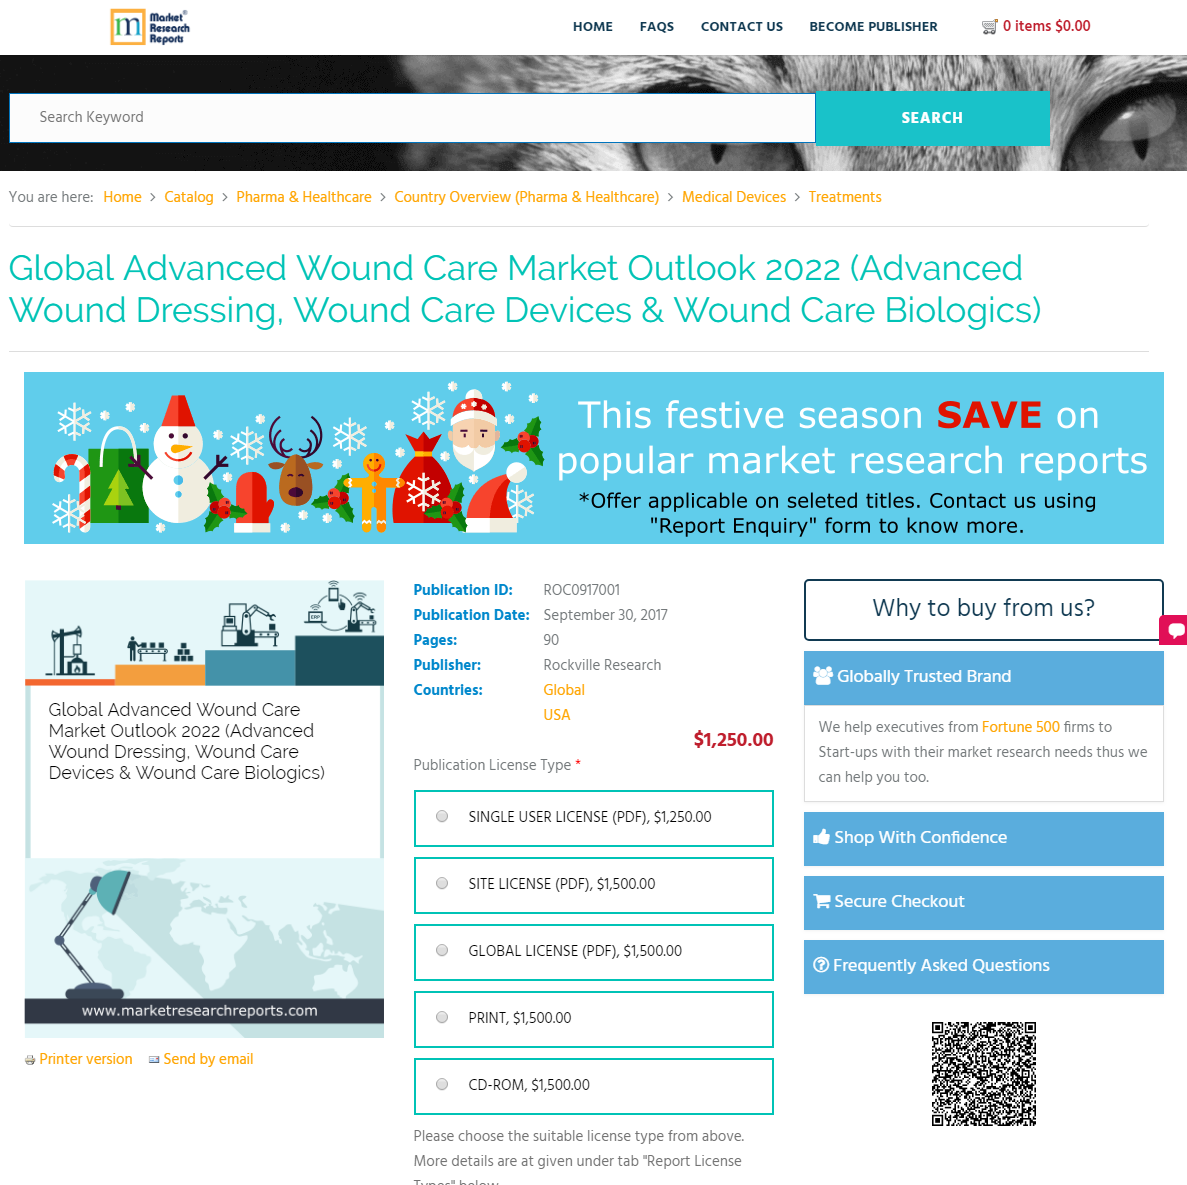 Global Advanced Wound Care Market Outlook 2022'